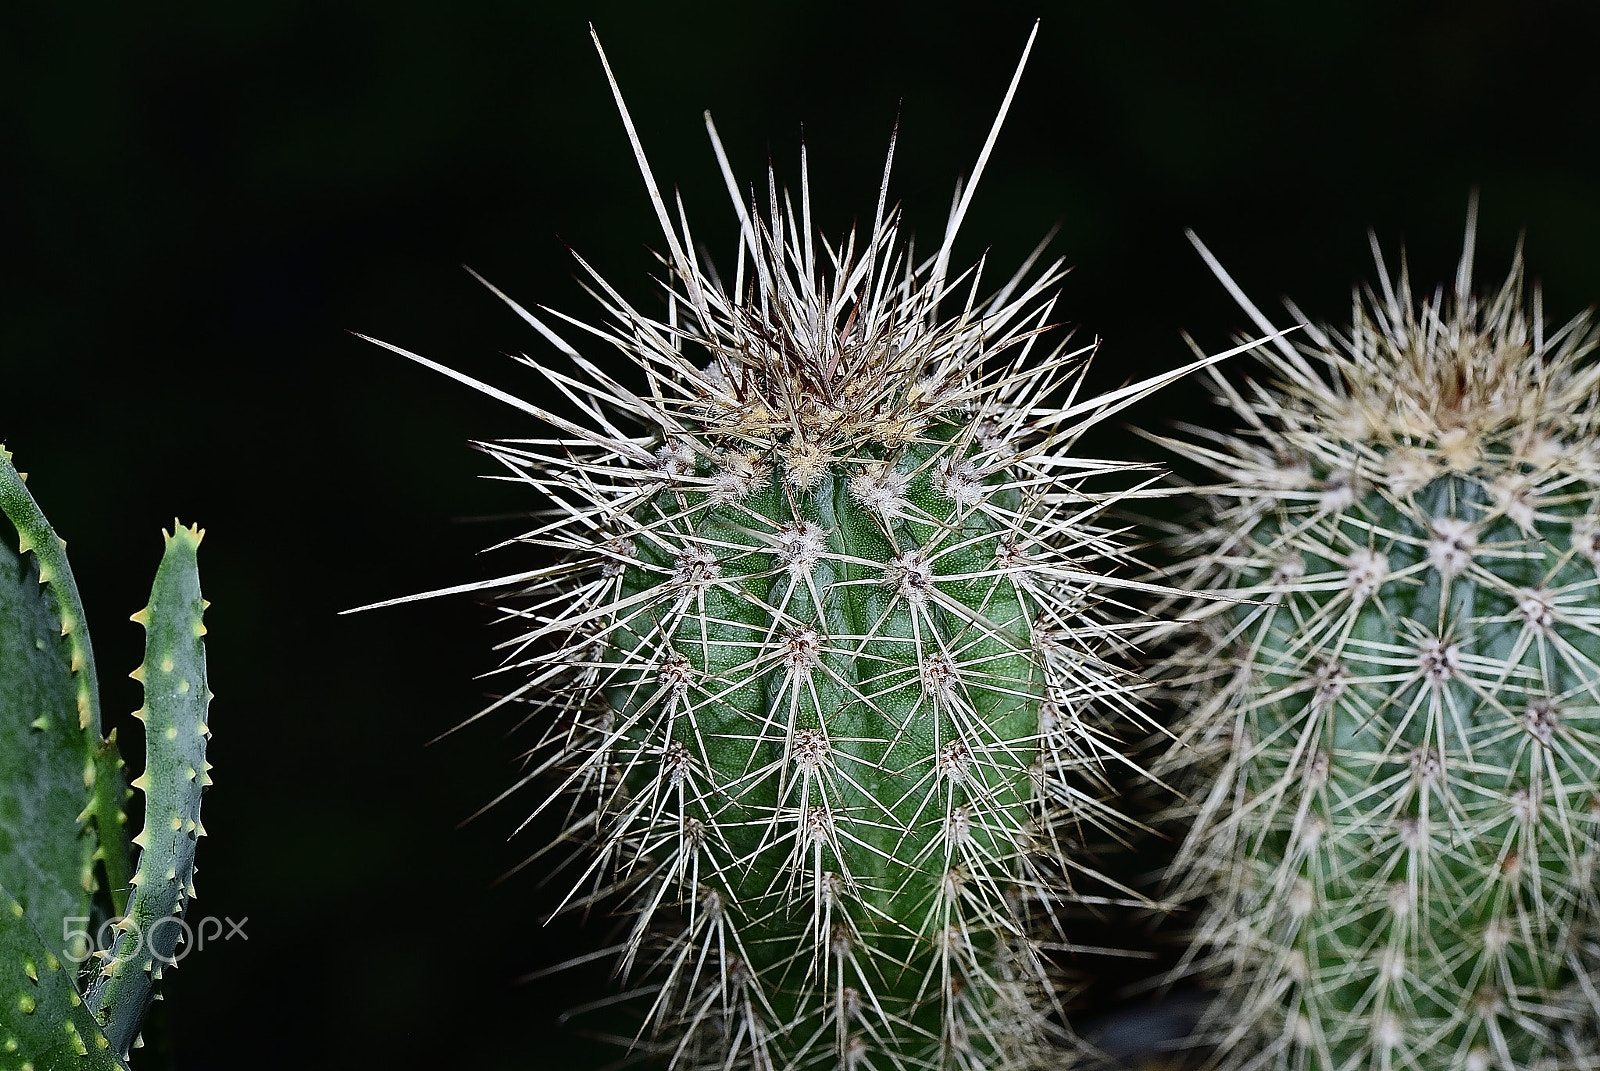 Nikon D200 + Nikon AF-S Micro-Nikkor 105mm F2.8G IF-ED VR sample photo. Don't touch the cactus, painful'll thorn photography